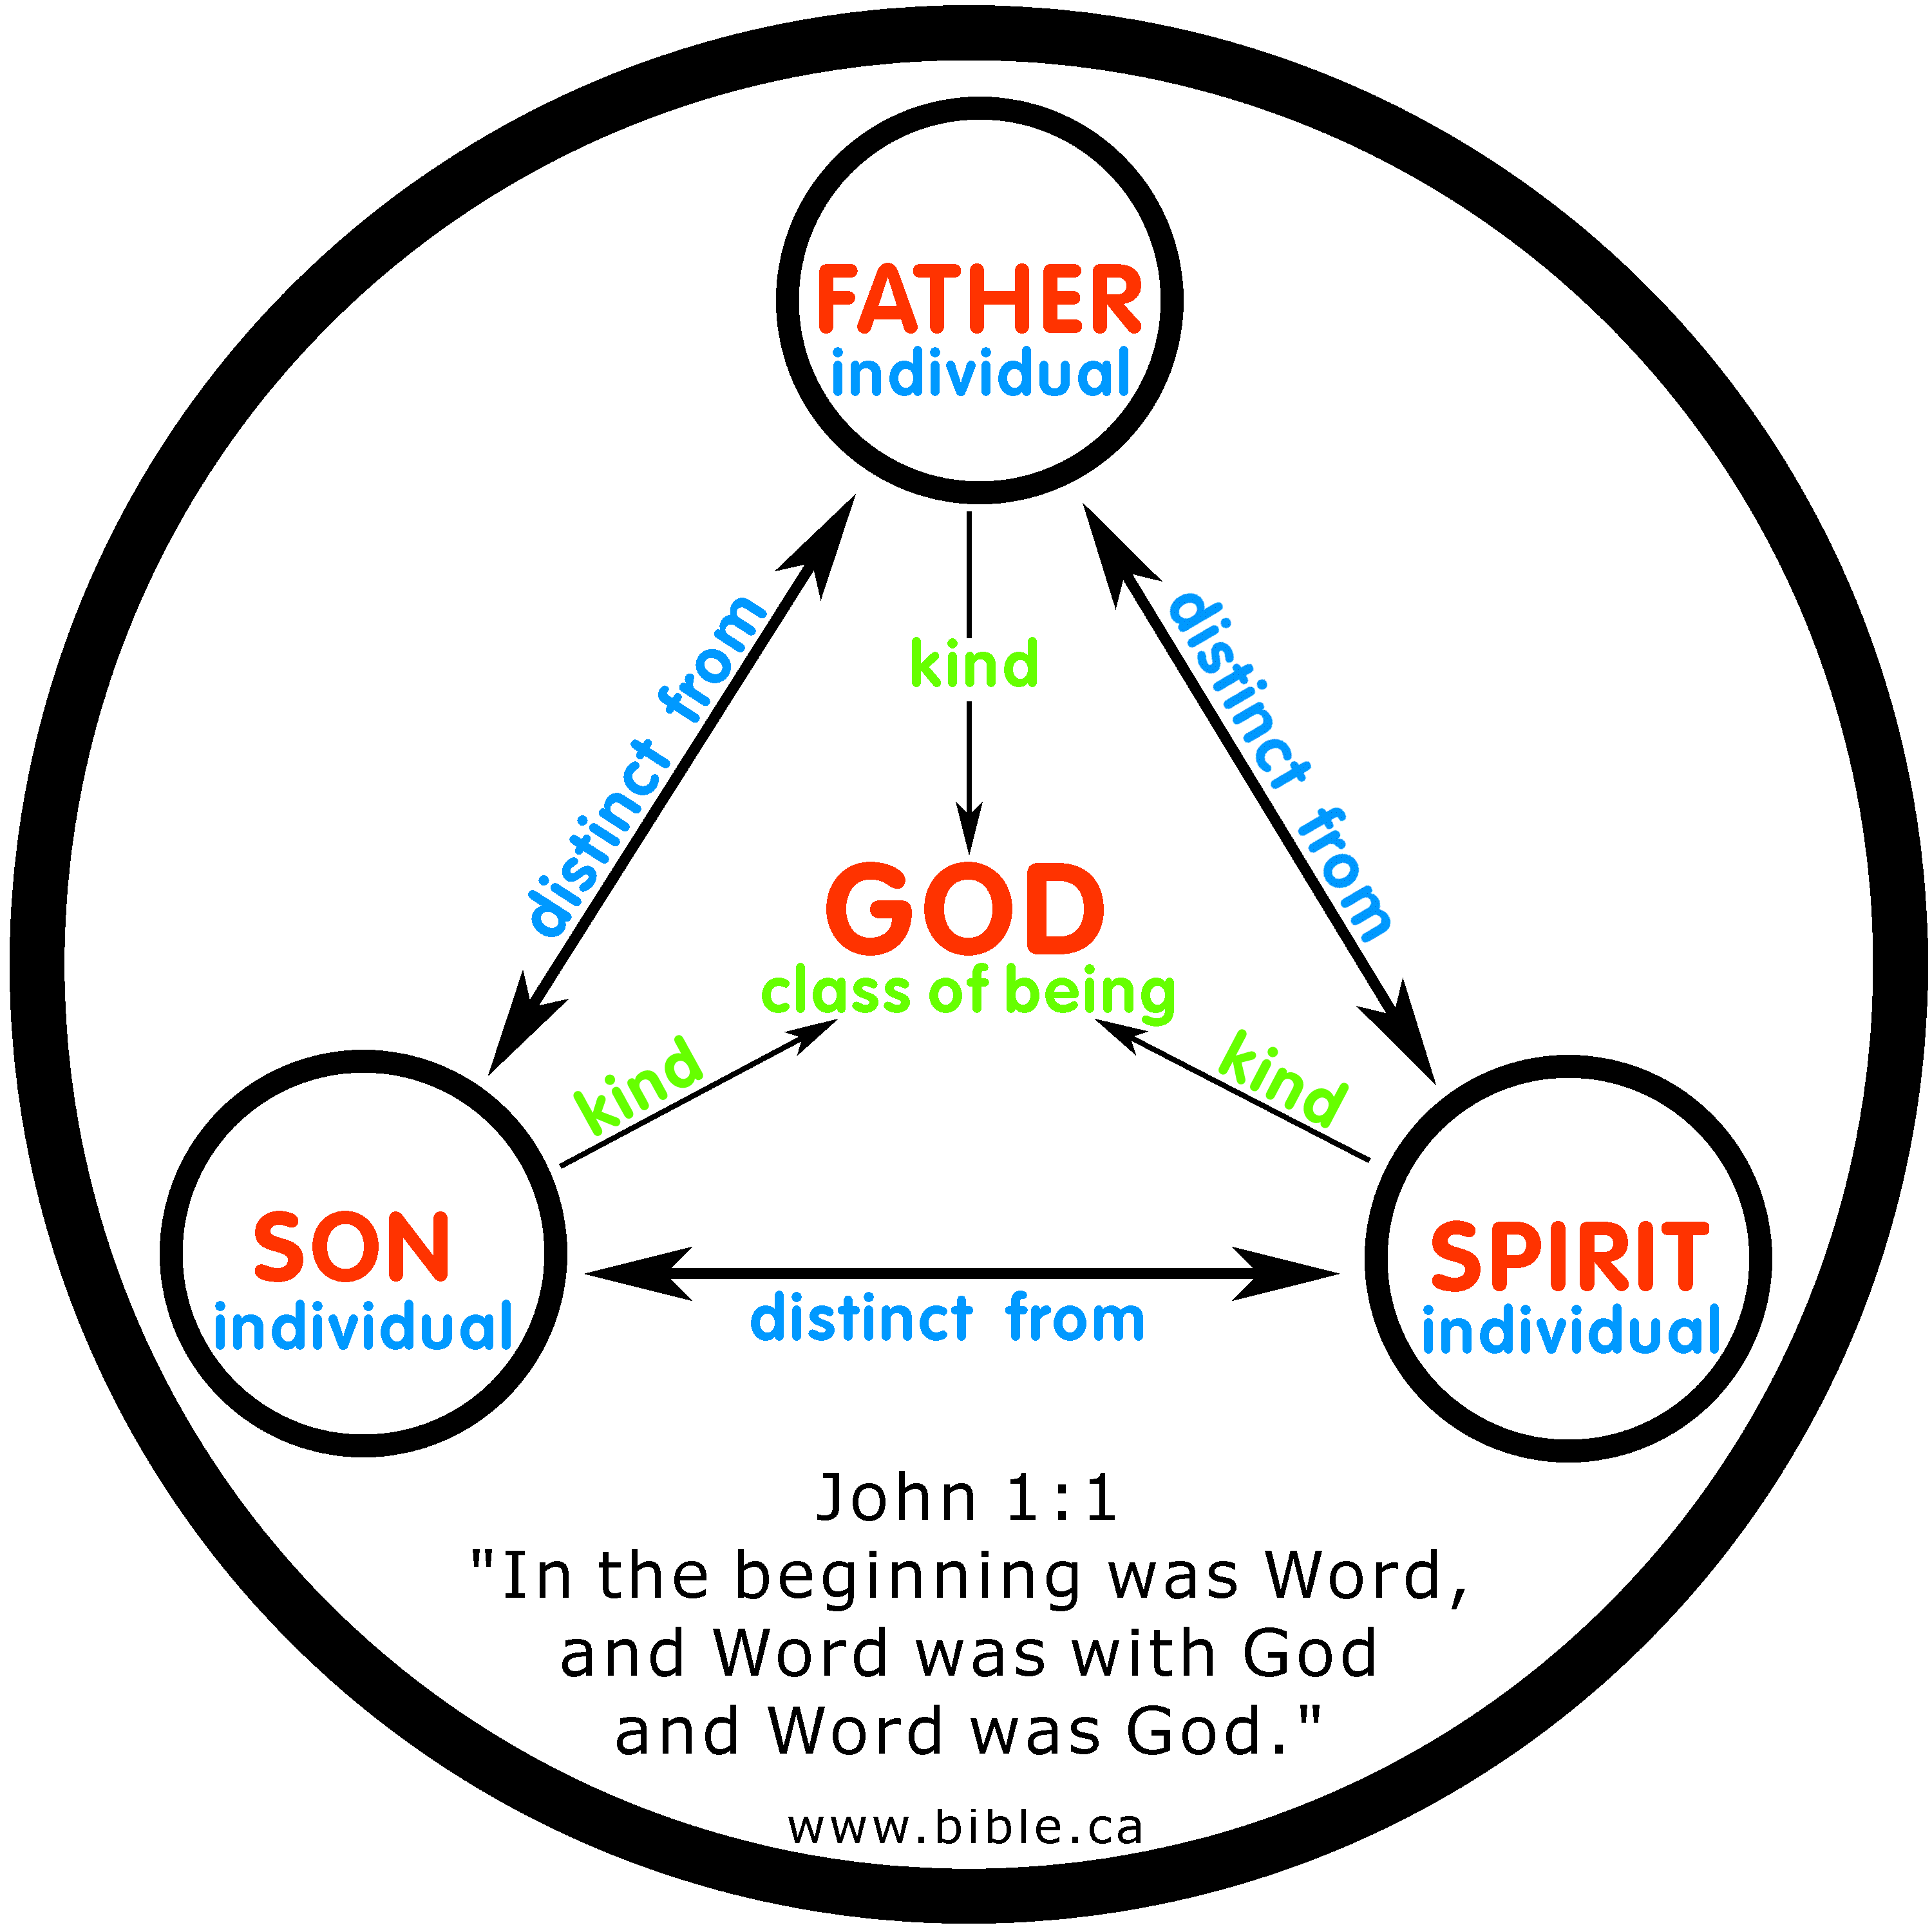 Meaning of trinity in hindi